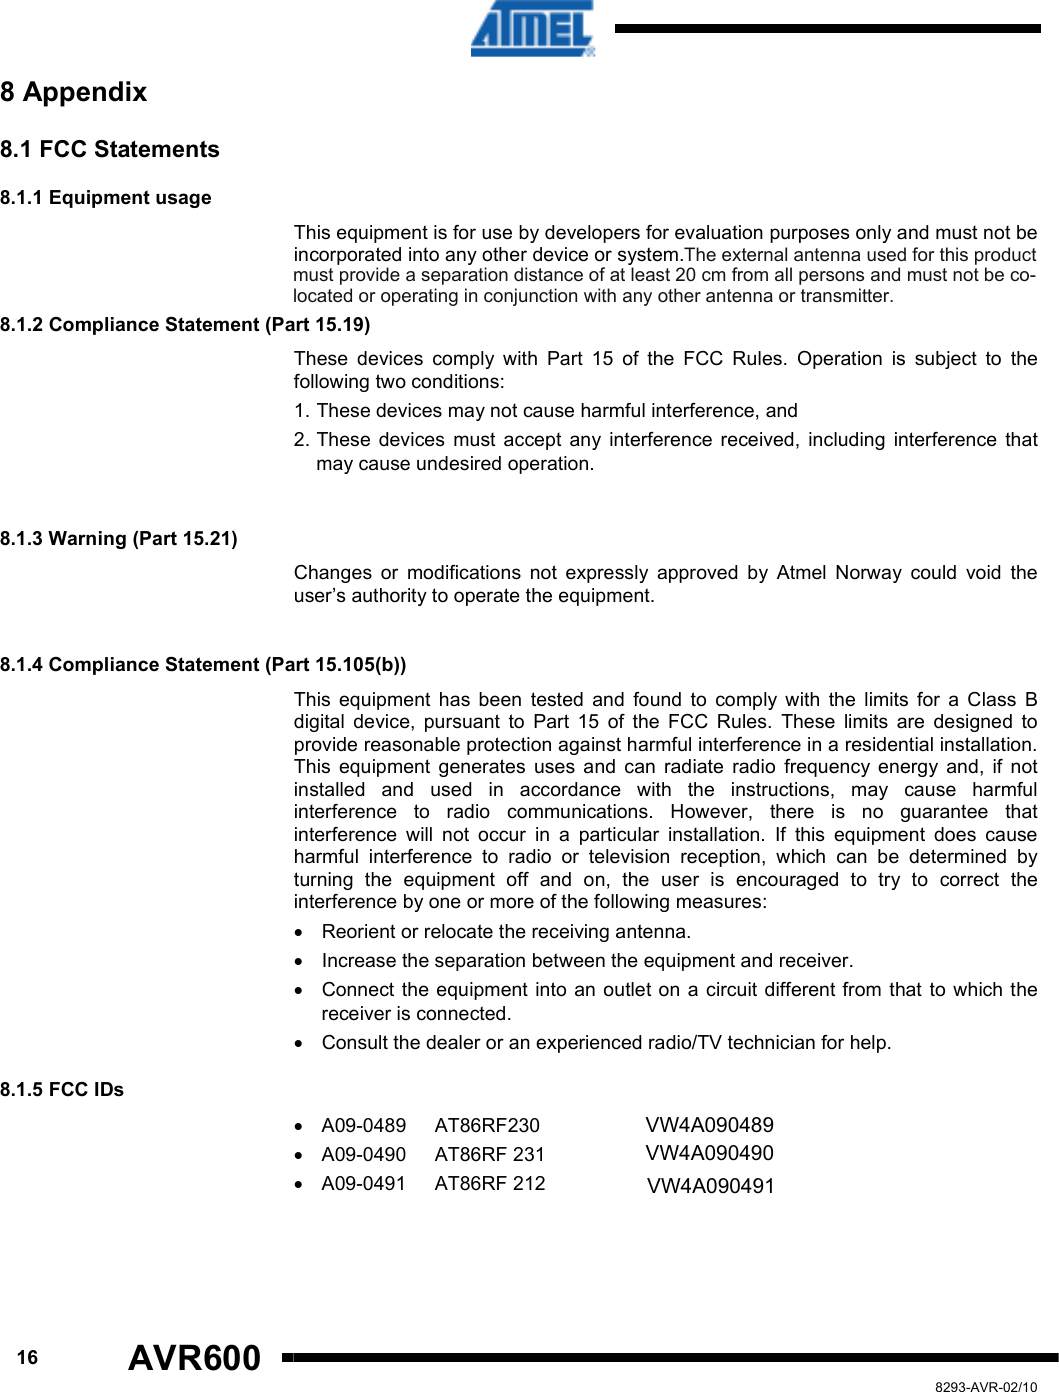      16 AVR600   8293-AVR-02/10 8 Appendix 8.1 FCC Statements  8.1.1 Equipment usage This equipment is for use by developers for evaluation purposes only and must not be incorporated into any other device or system.   8.1.2 Compliance Statement (Part 15.19)  These  devices  comply  with  Part  15  of  the  FCC  Rules.  Operation  is  subject  to  the following two conditions:  1. These devices may not cause harmful interference, and  2. These  devices  must  accept  any  interference  received,  including  interference  that may cause undesired operation.   8.1.3 Warning (Part 15.21)  Changes  or  modifications  not  expressly  approved  by  Atmel  Norway  could  void  the user’s authority to operate the equipment.   8.1.4 Compliance Statement (Part 15.105(b))  This  equipment  has  been  tested  and  found  to  comply  with  the  limits  for  a  Class  B digital  device,  pursuant  to  Part  15  of  the  FCC  Rules.  These  limits  are  designed  to provide reasonable protection against harmful interference in a residential installation. This  equipment  generates  uses  and  can  radiate  radio  frequency  energy  and,  if  not installed  and  used  in  accordance  with  the  instructions,  may  cause  harmful interference  to  radio  communications.  However,  there  is  no  guarantee  that interference  will  not  occur  in  a  particular  installation.  If  this  equipment  does  cause harmful  interference  to  radio  or  television  reception,  which  can  be  determined  by turning  the  equipment  off  and  on,  the  user  is  encouraged  to  try  to  correct  the interference by one or more of the following measures:  •  Reorient or relocate the receiving antenna.  •  Increase the separation between the equipment and receiver.  •  Connect  the equipment into an outlet on a circuit different from that to which the receiver is connected.  •  Consult the dealer or an experienced radio/TV technician for help. 8.1.5 FCC IDs  •  A09-0489  AT86RF230    VW4A09-0489 •  A09-0490  AT86RF 231    VW4A09-0490 •  A09-0491  AT86RF 212    VW4A09-0491     VW4A090489VW4A090490VW4A090491The external antenna used for this productmust provide a separation distance of at least 20 cm from all persons and must not be colocated or operating in conjunction with any other antenna or transmitter.